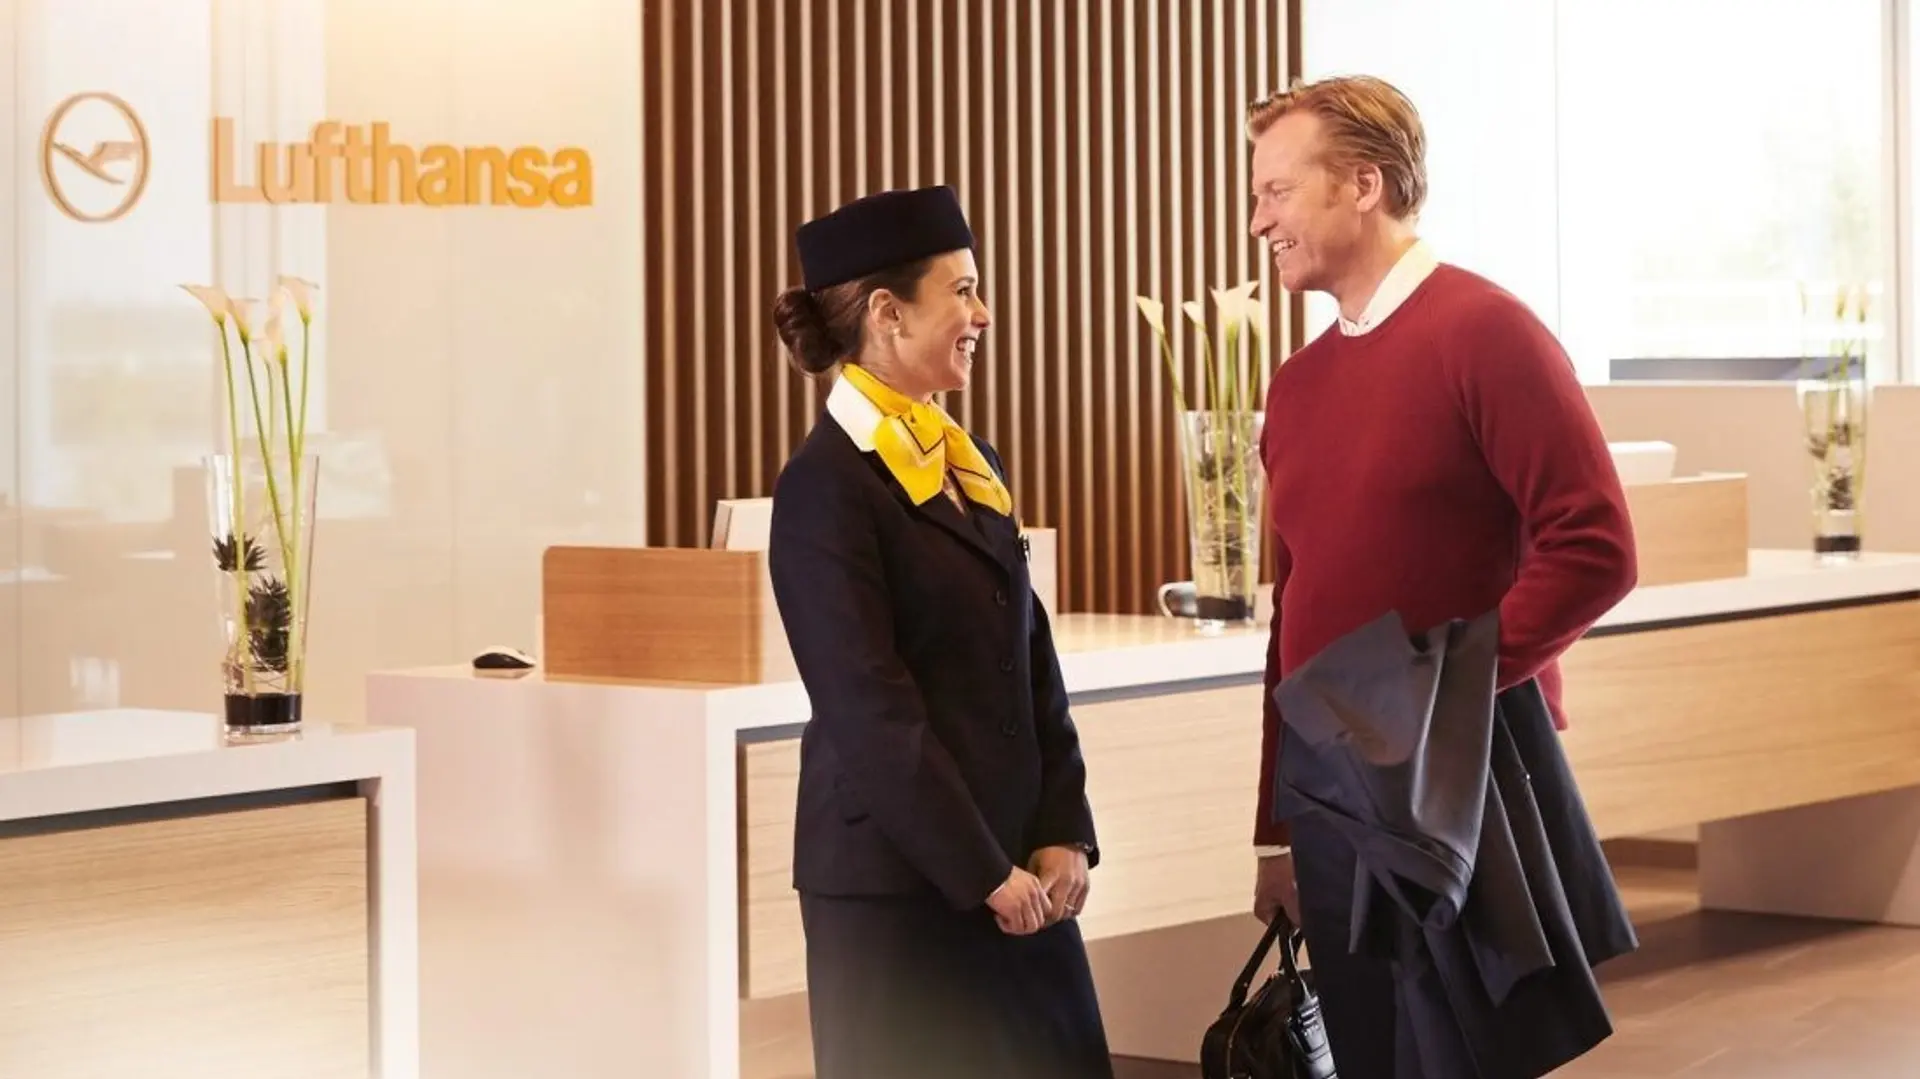 Airline review Airport experience - Lufthansa - 2